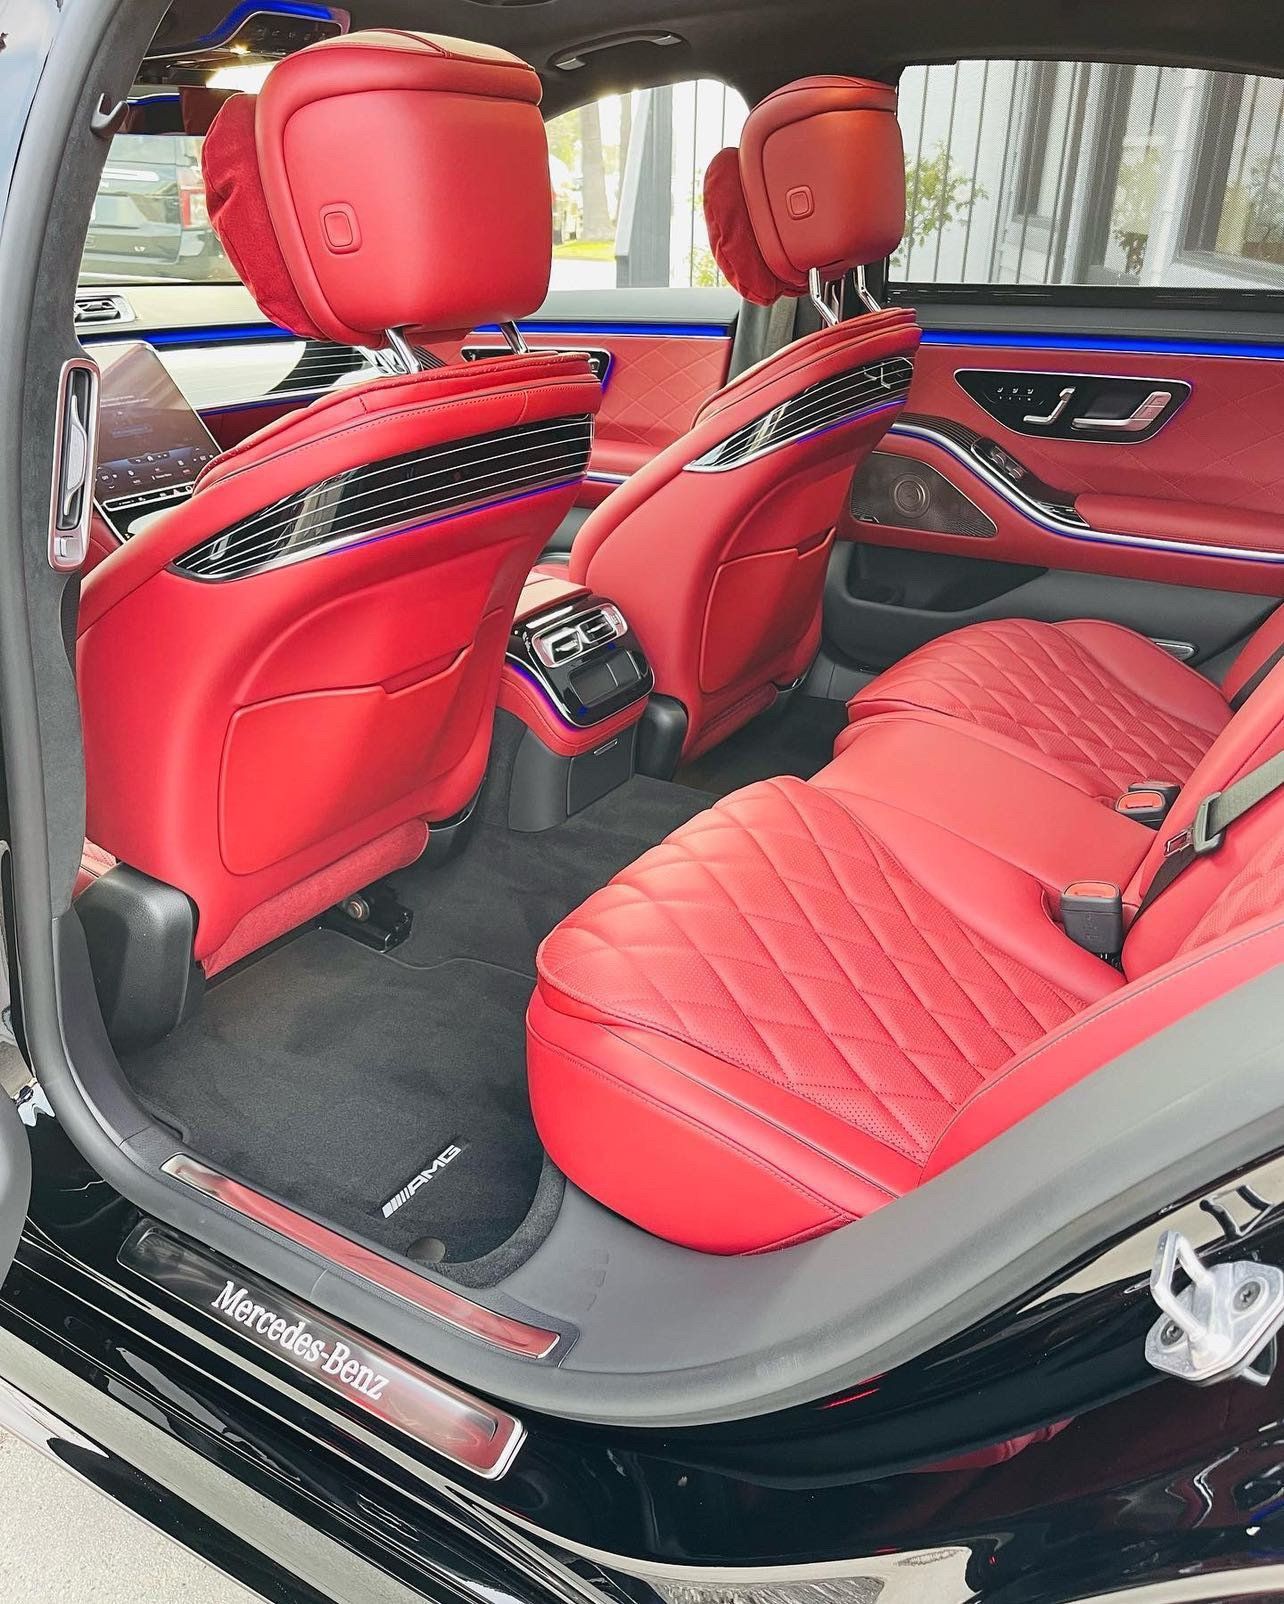 the interior of a black mercedes benz s class with red seats .